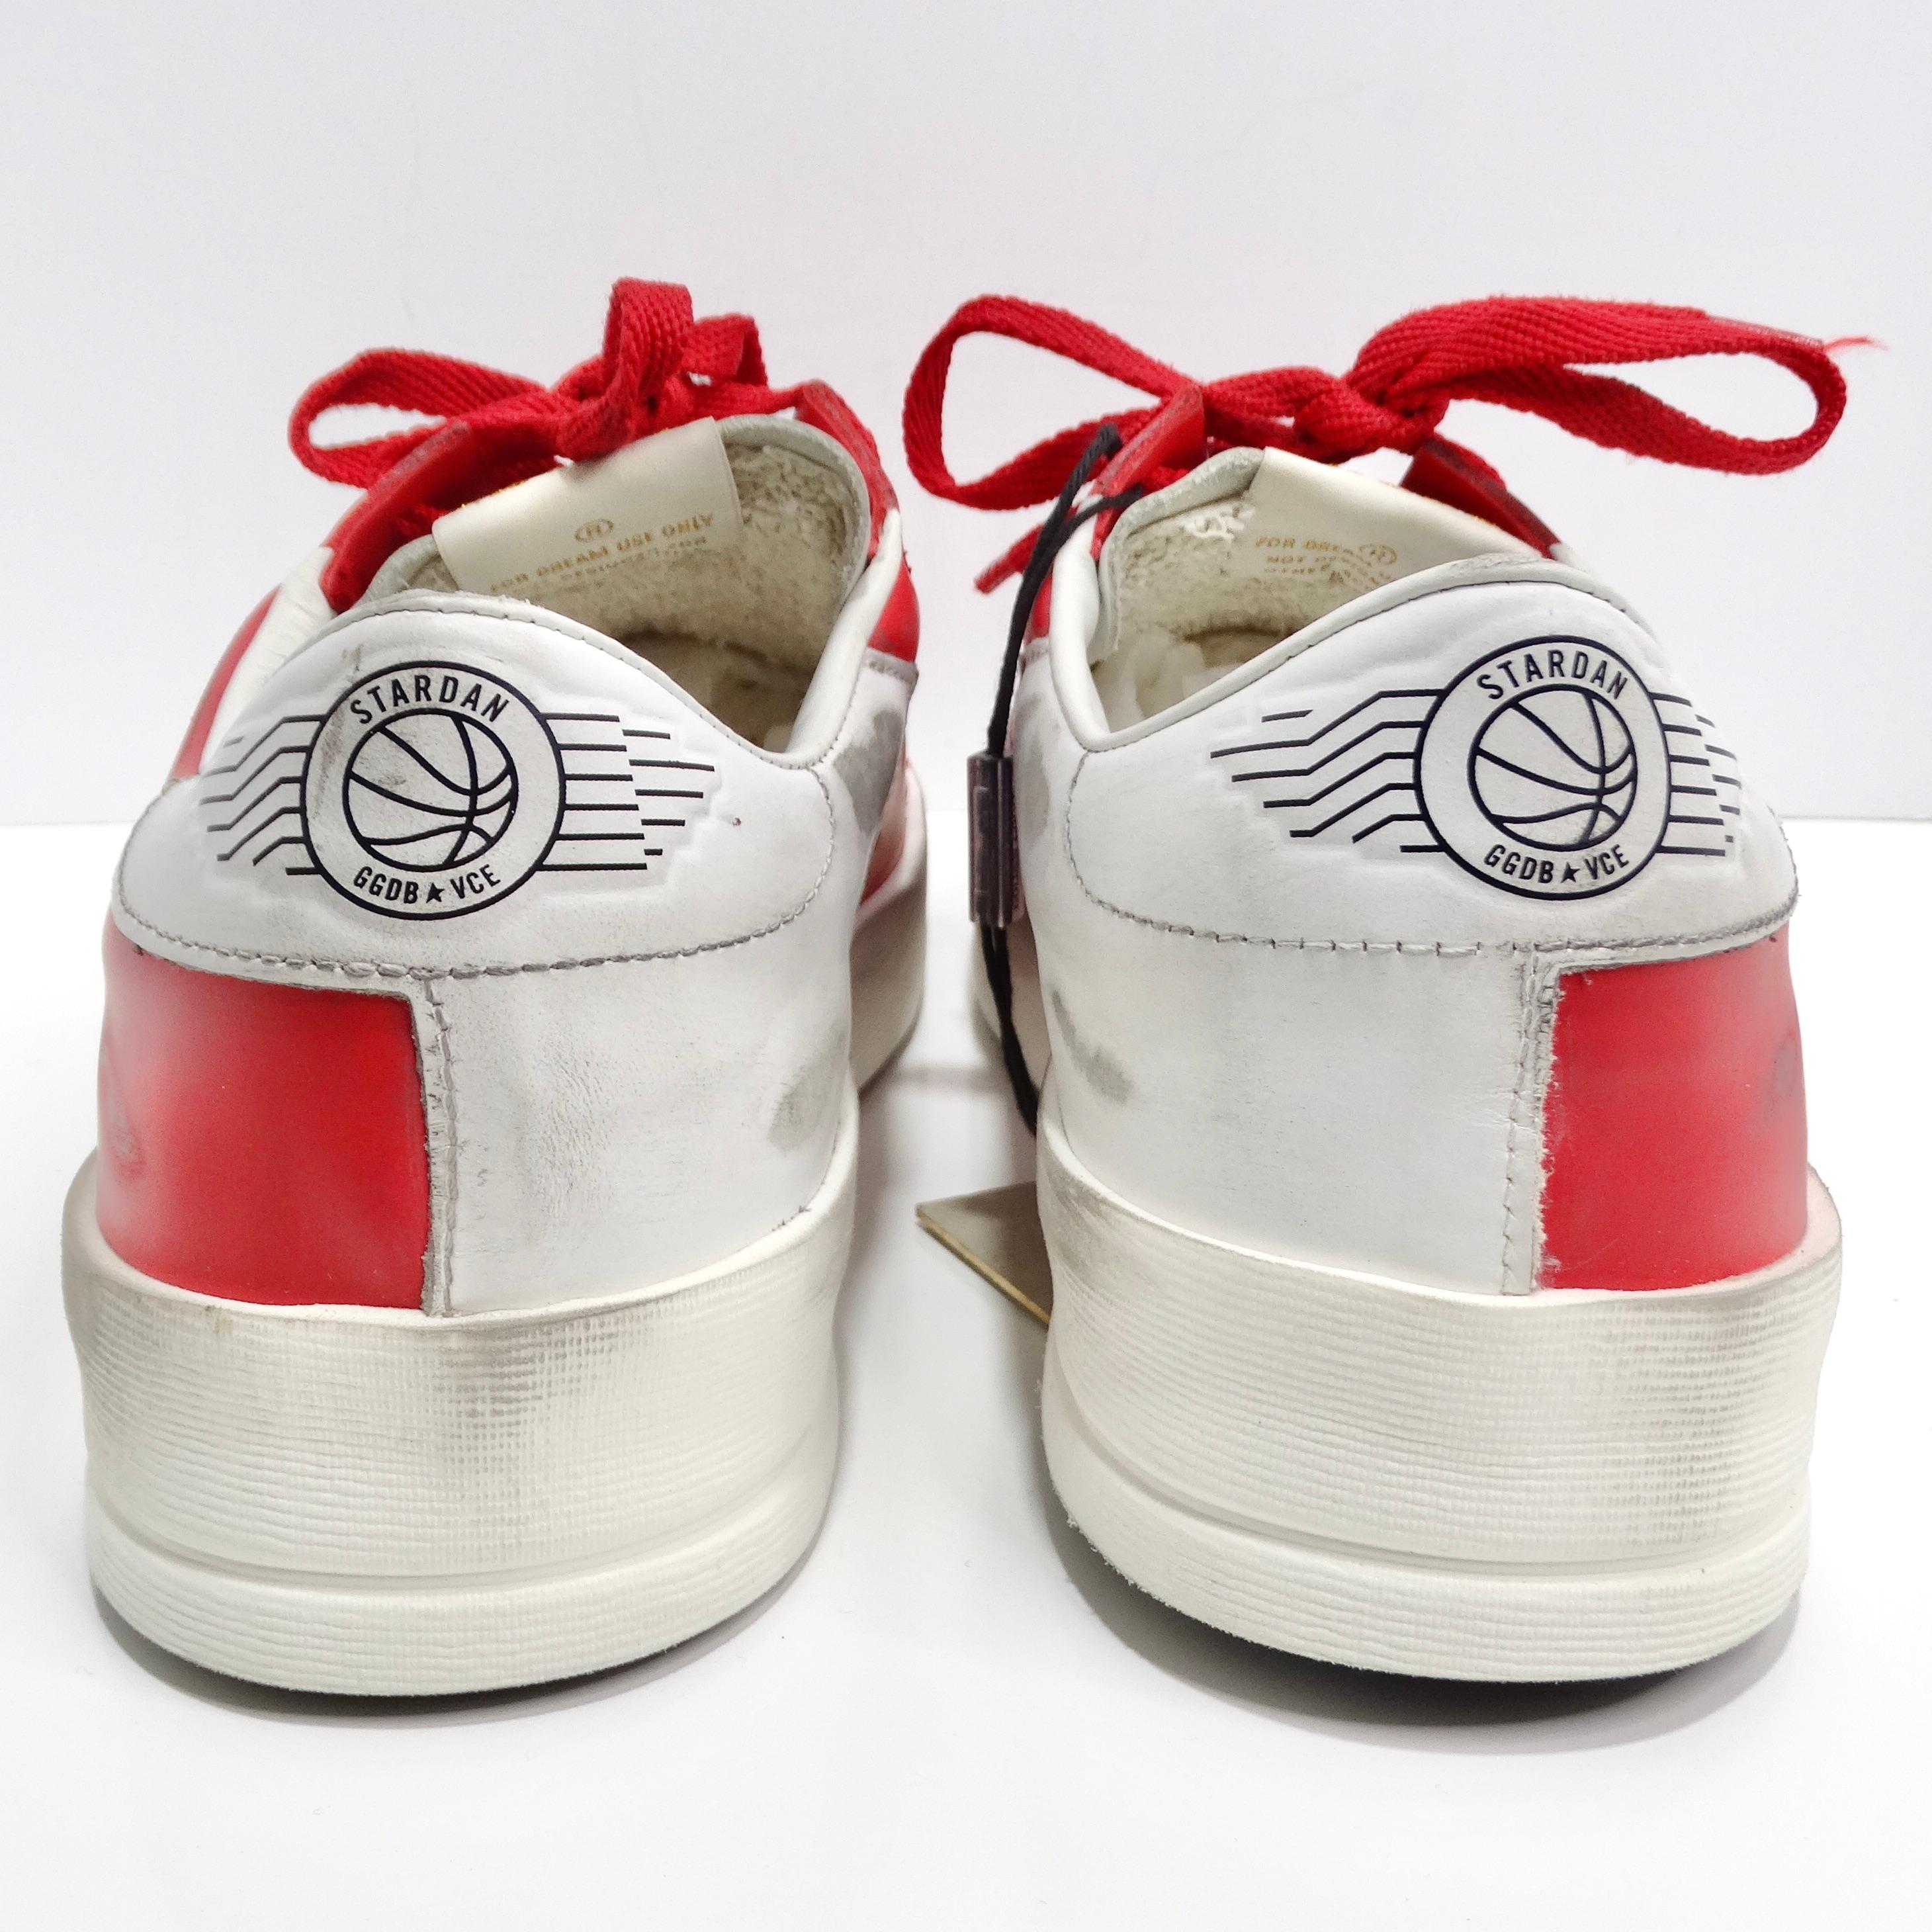 Golden Goose Brand New Stardan Leather Sneakers Red 5